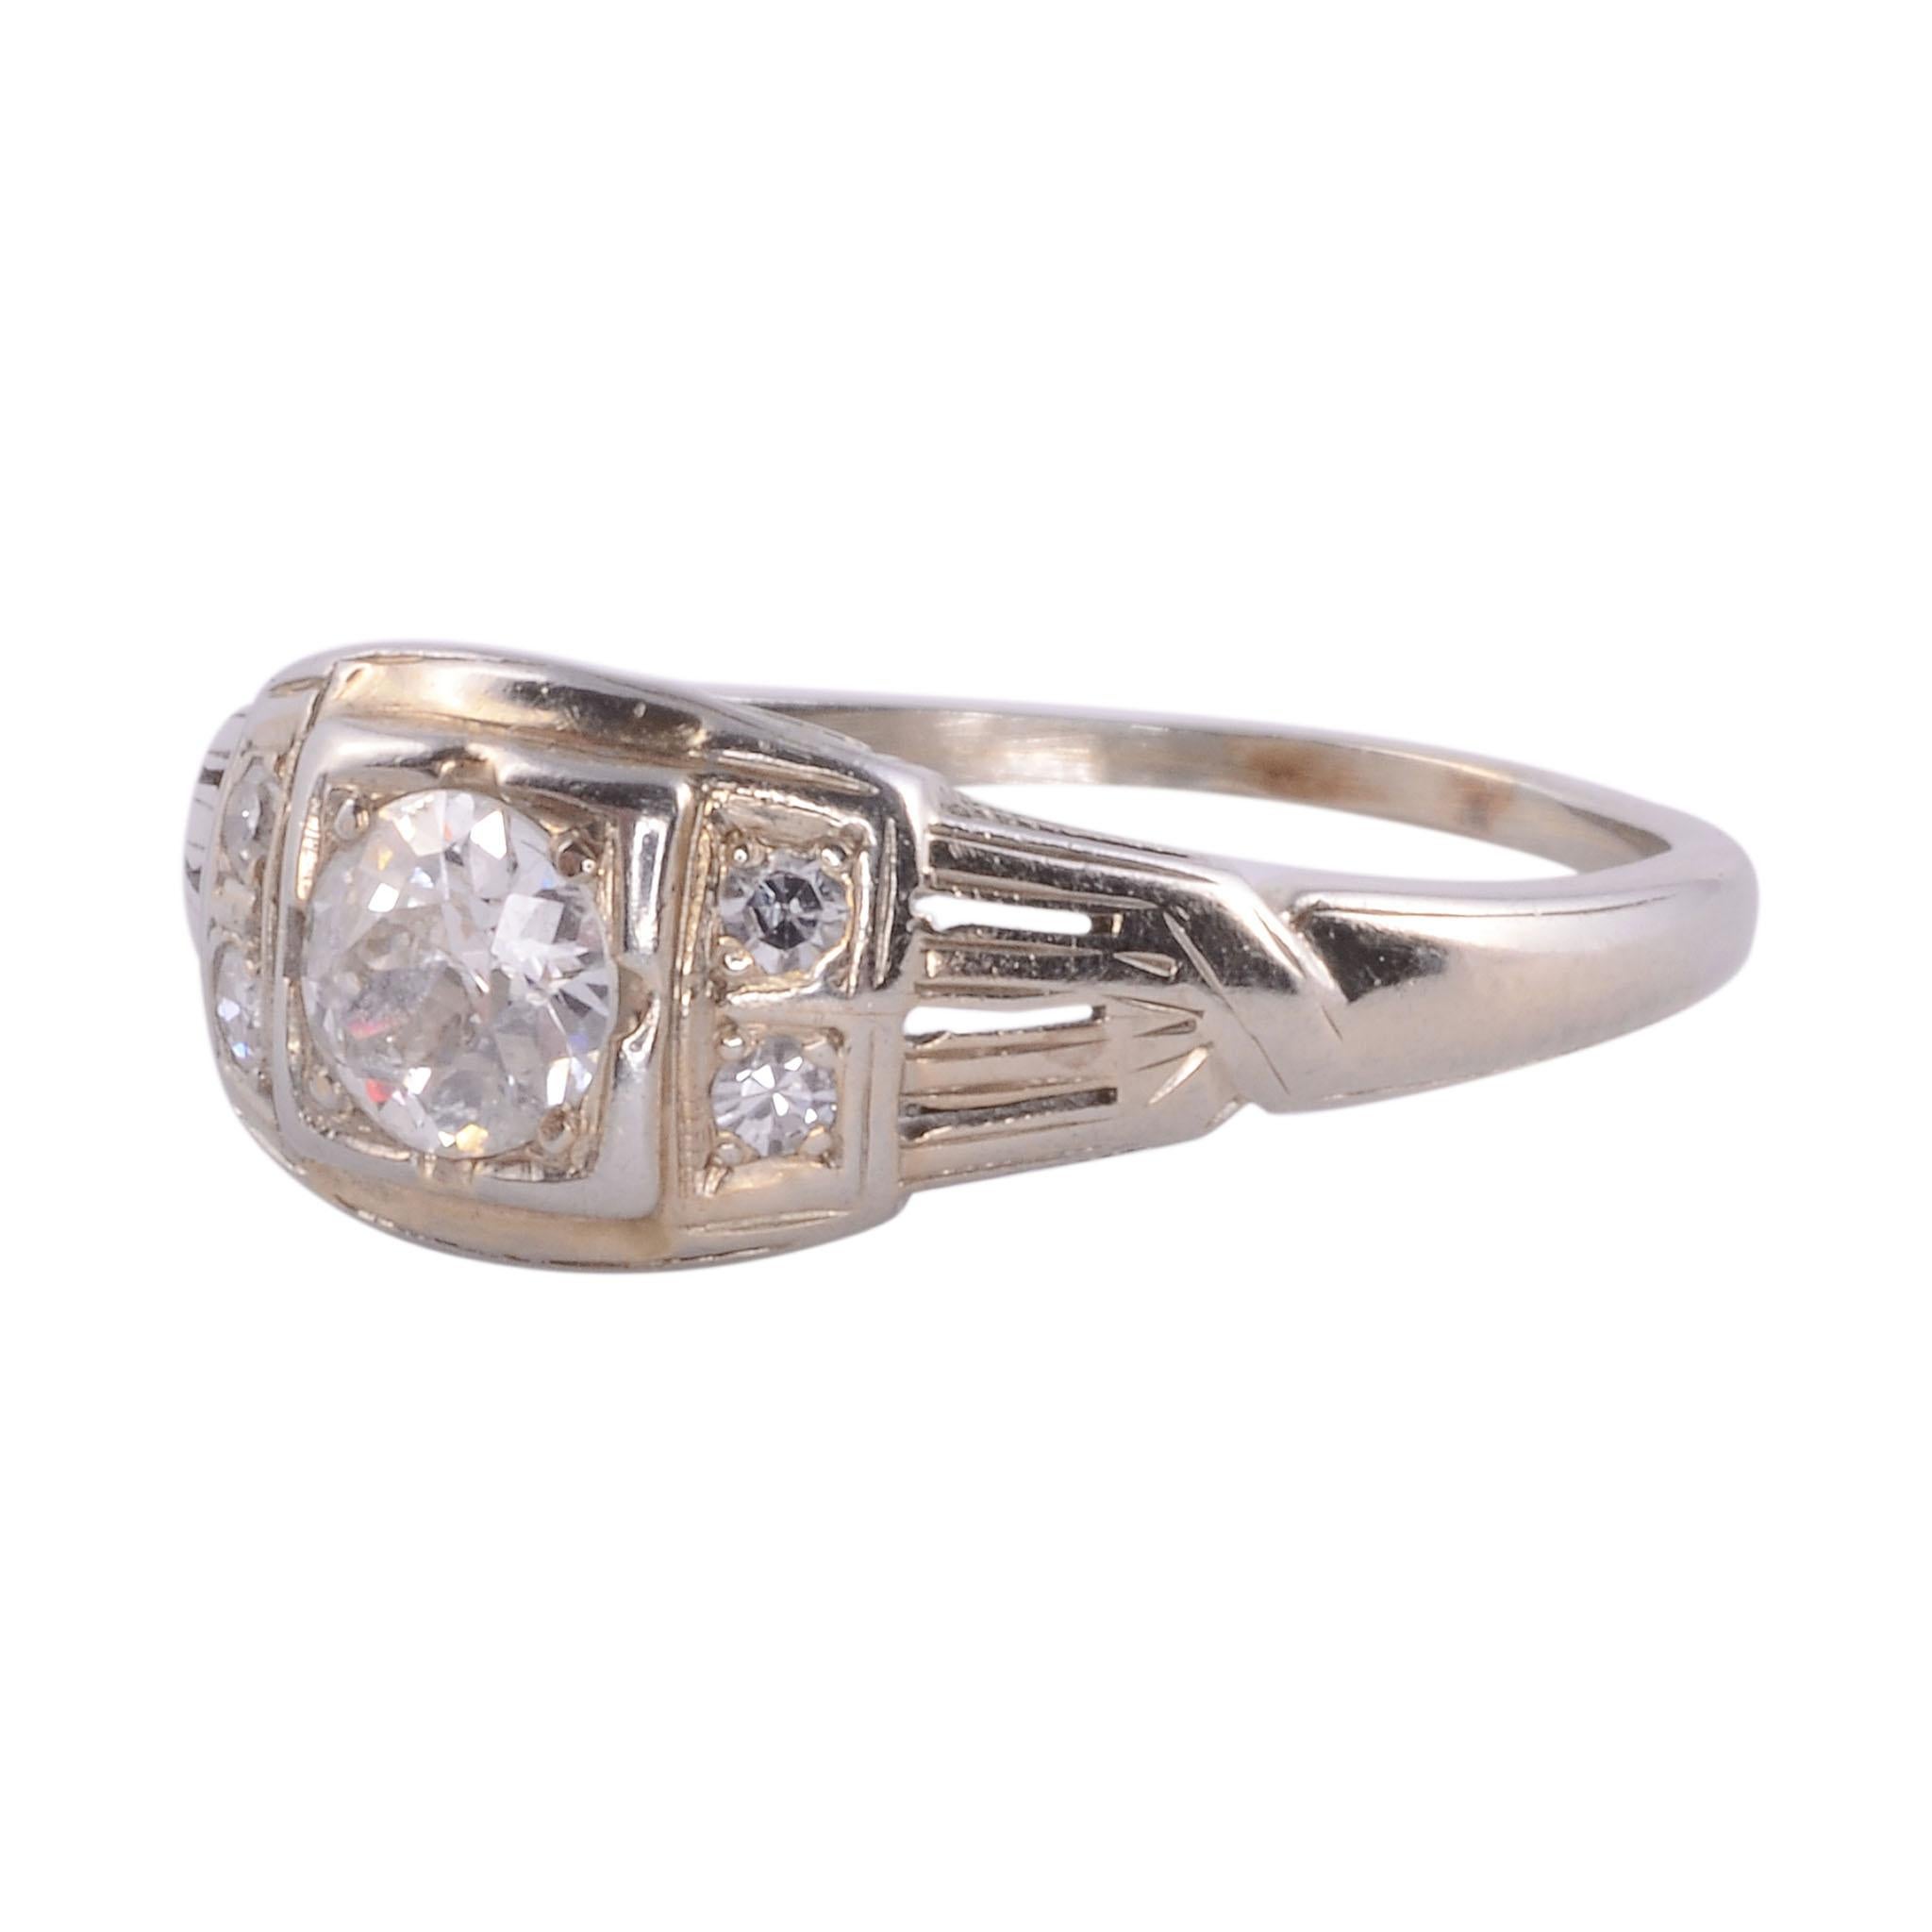 Vintage old mine cut diamond 18KW ring, circa 1930. This 18 karat white gold ring features an Old Mine cut diamond center at .36 carat, I1 H. It is accented with four side diamonds at approximately .12 carat total weight, VS G-H. This ring is a size